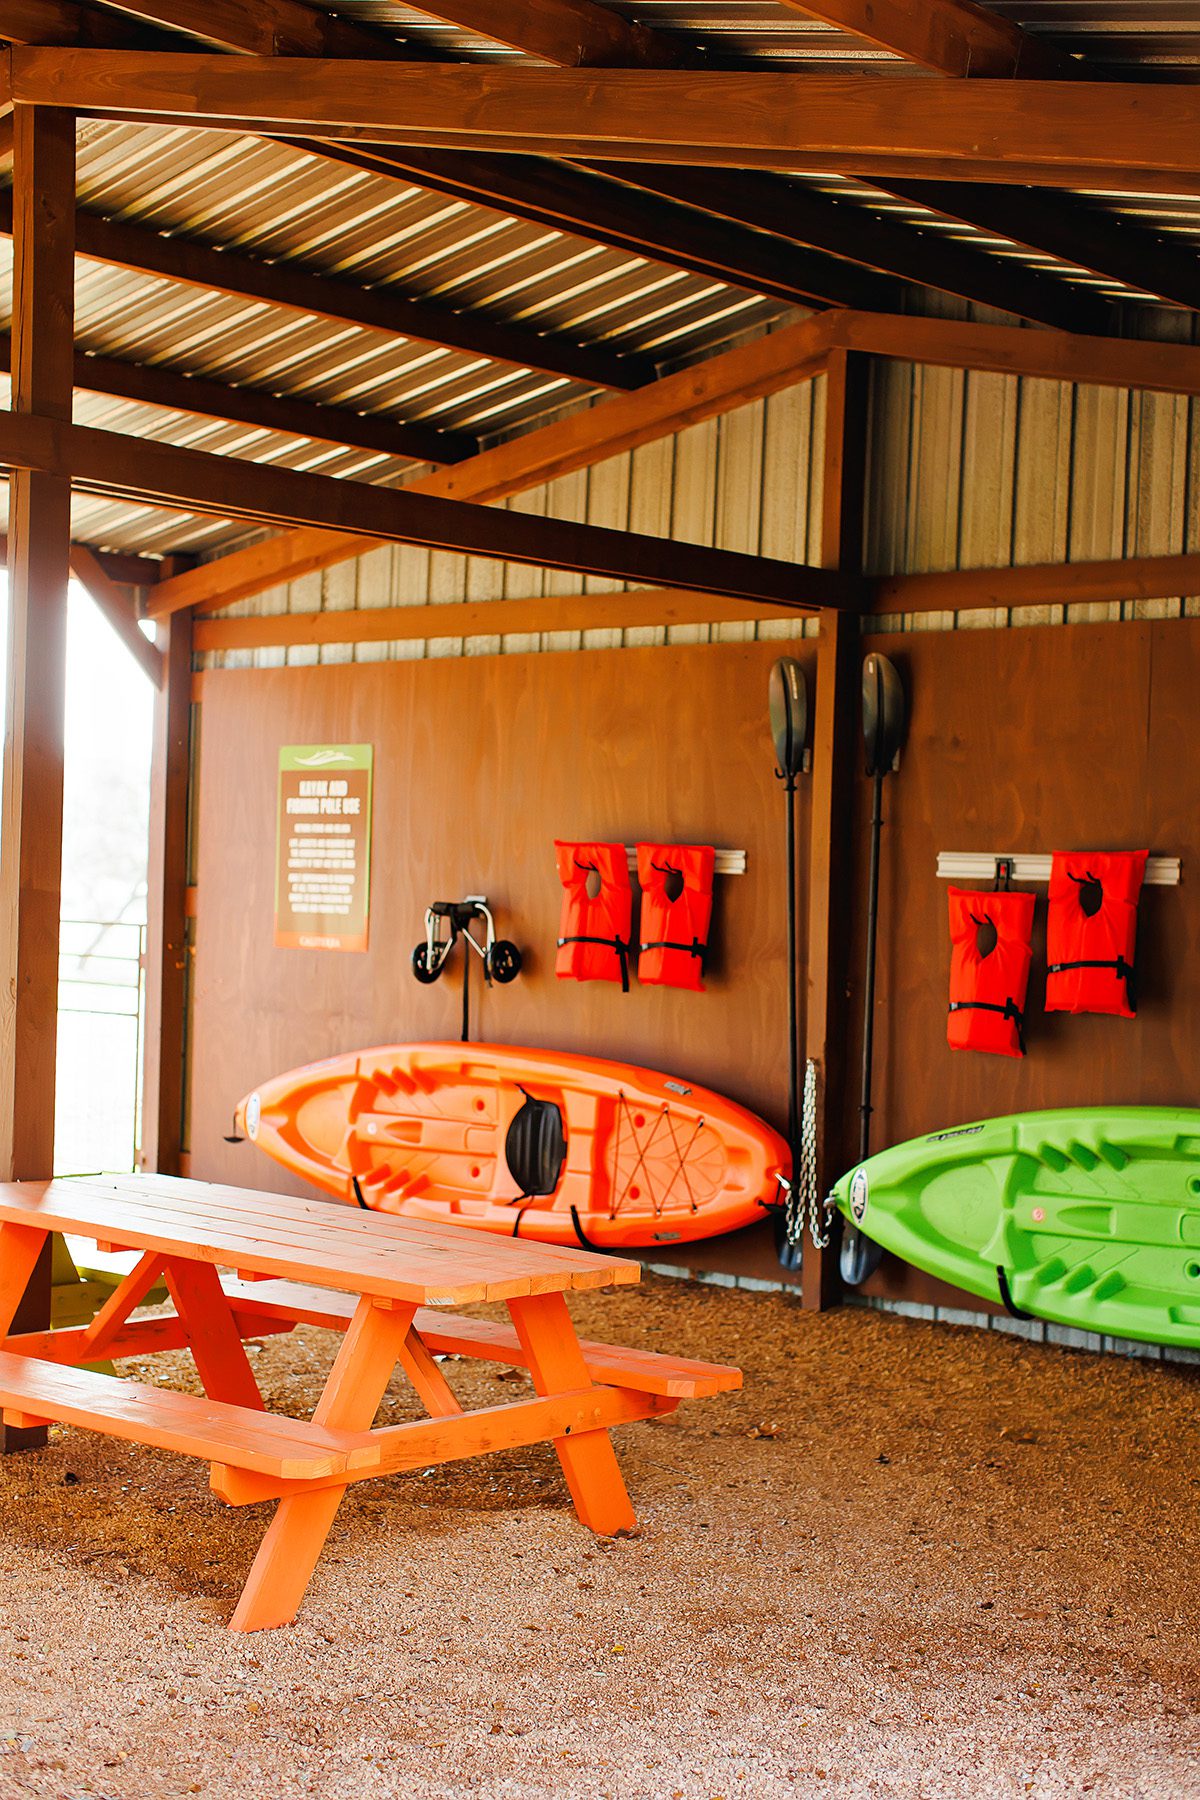 The Adventure Barn in Caliterra Dripping Springs